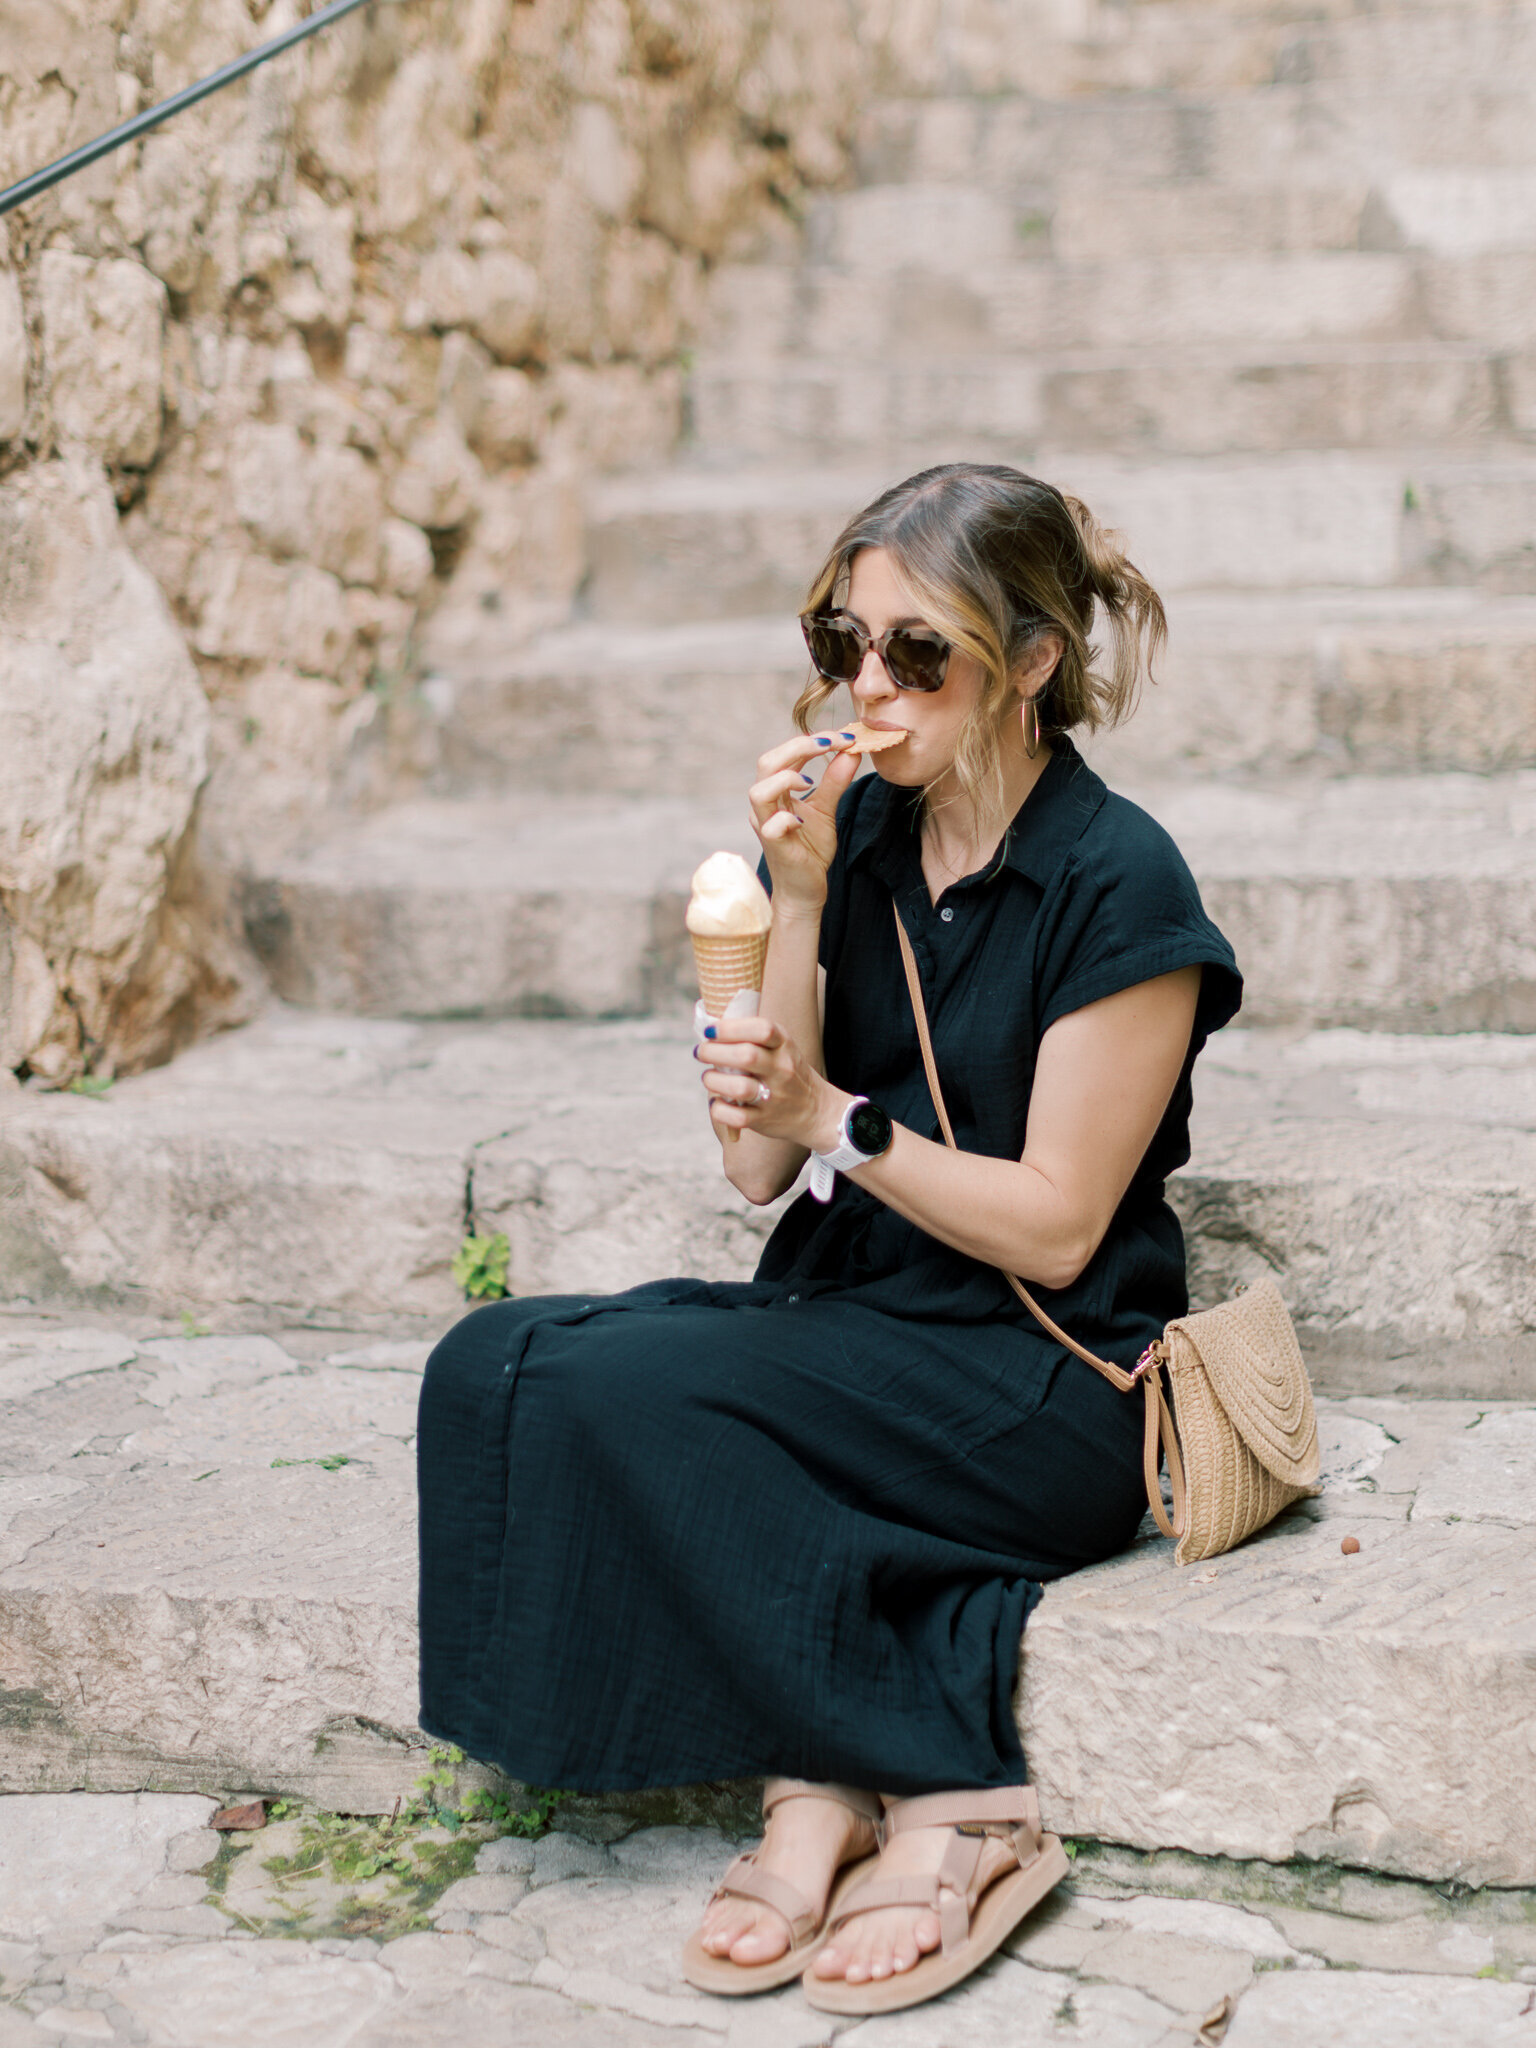 Little Rock photographer Bailey Feeler in black dress and sunglasses sits on step eating gelato